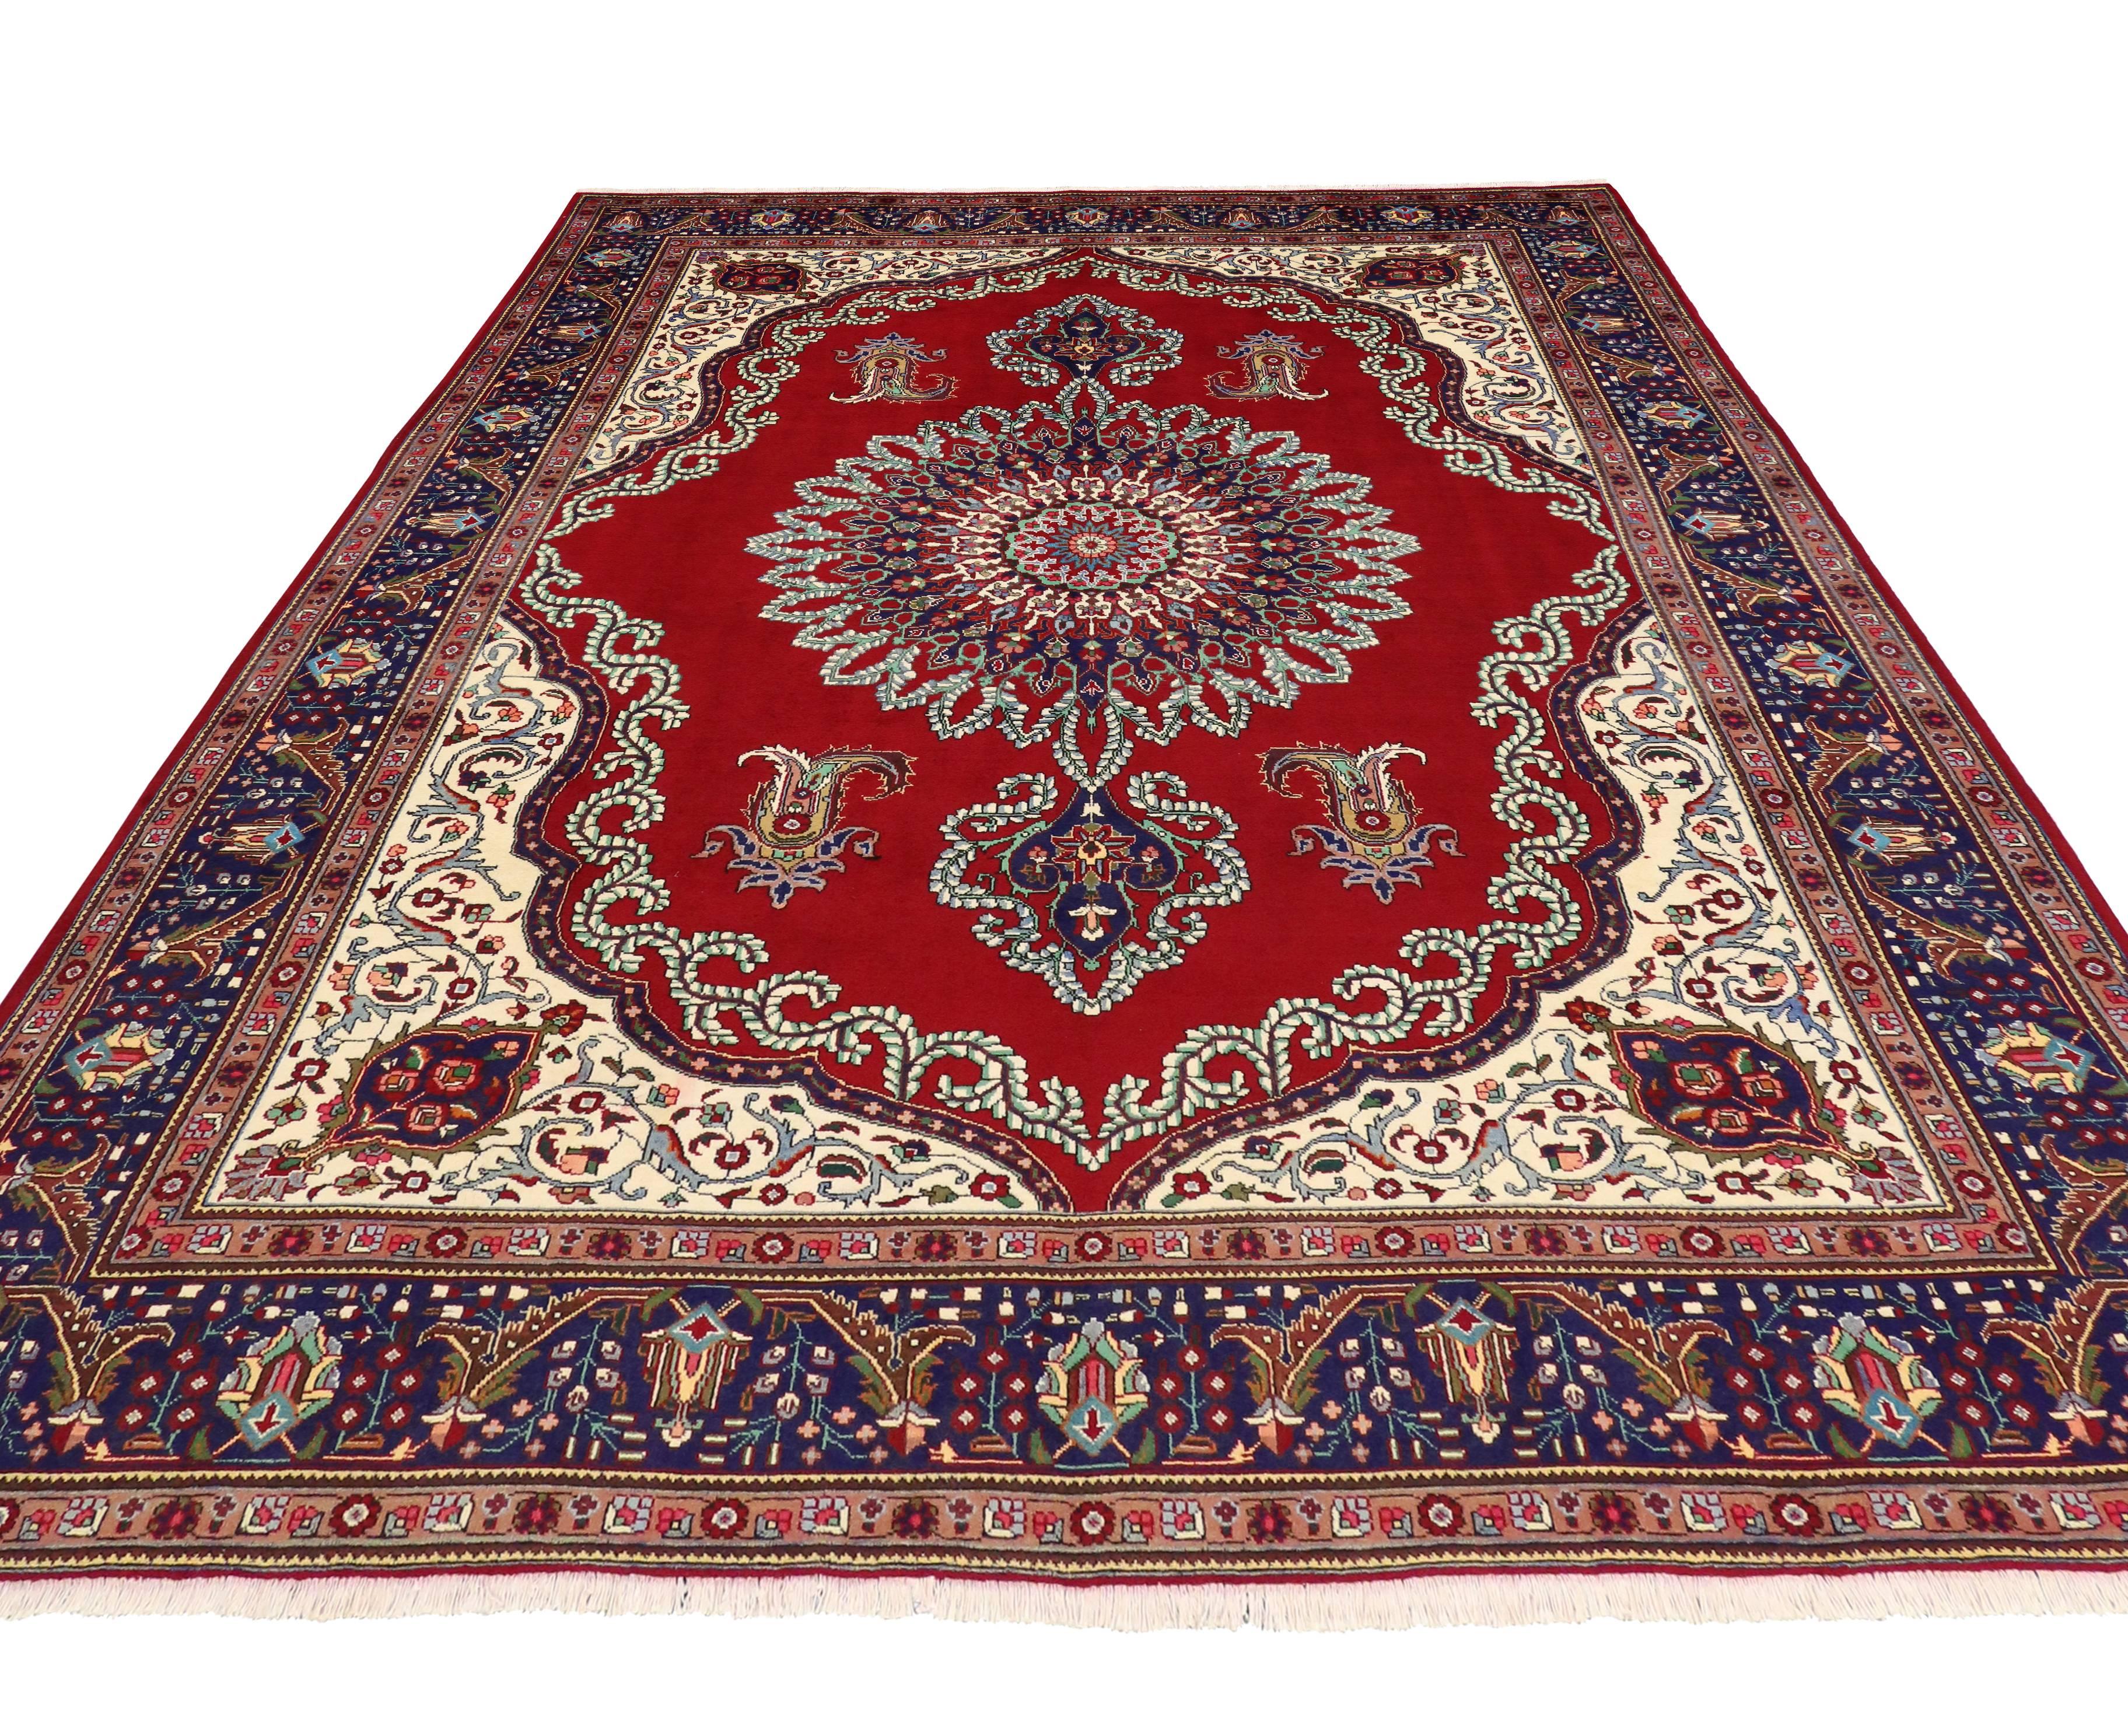 Vintage Persian Tabriz Rug with Regal Jacobean Style In Good Condition For Sale In Dallas, TX